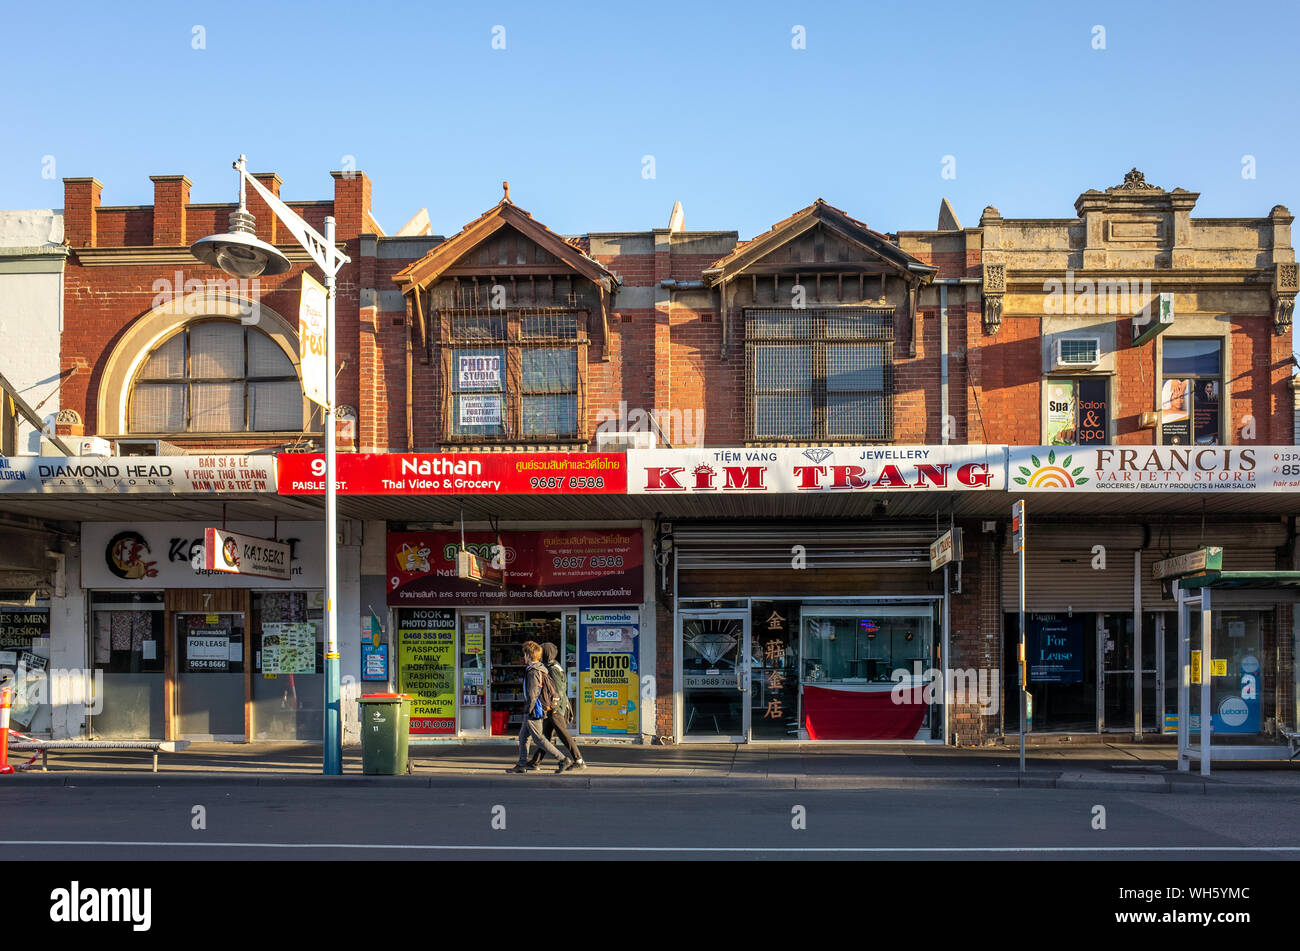 Some small local shops along the street in Footscray. Footscray is an inner-western suburb of Melbourne. Melbourne, VIC/Australia Stock Photo